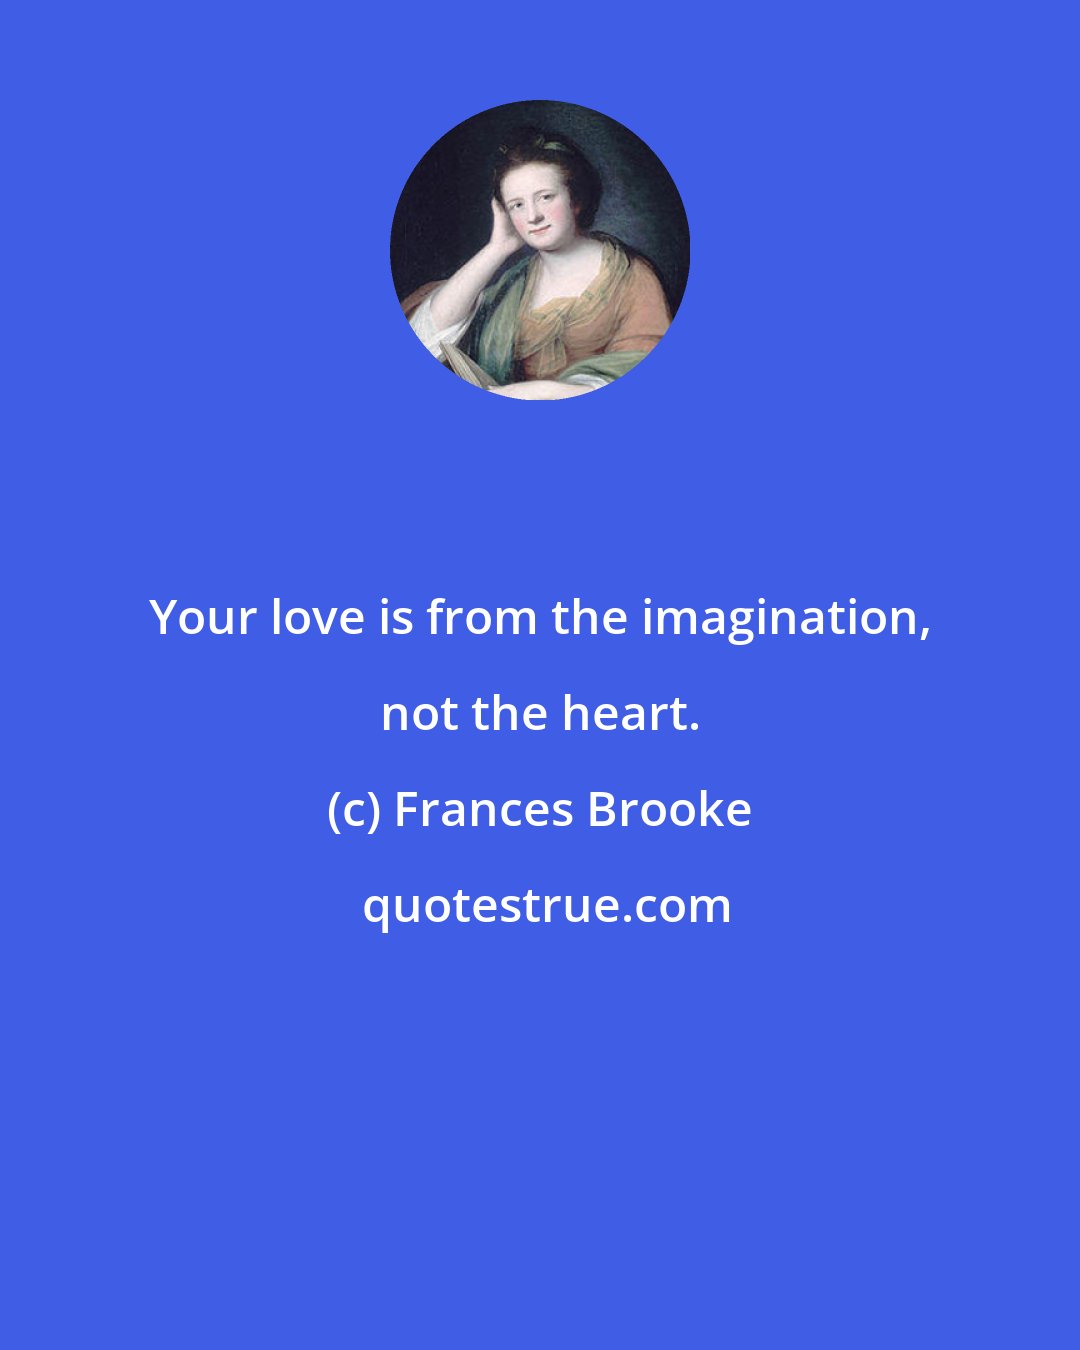 Frances Brooke: Your love is from the imagination, not the heart.